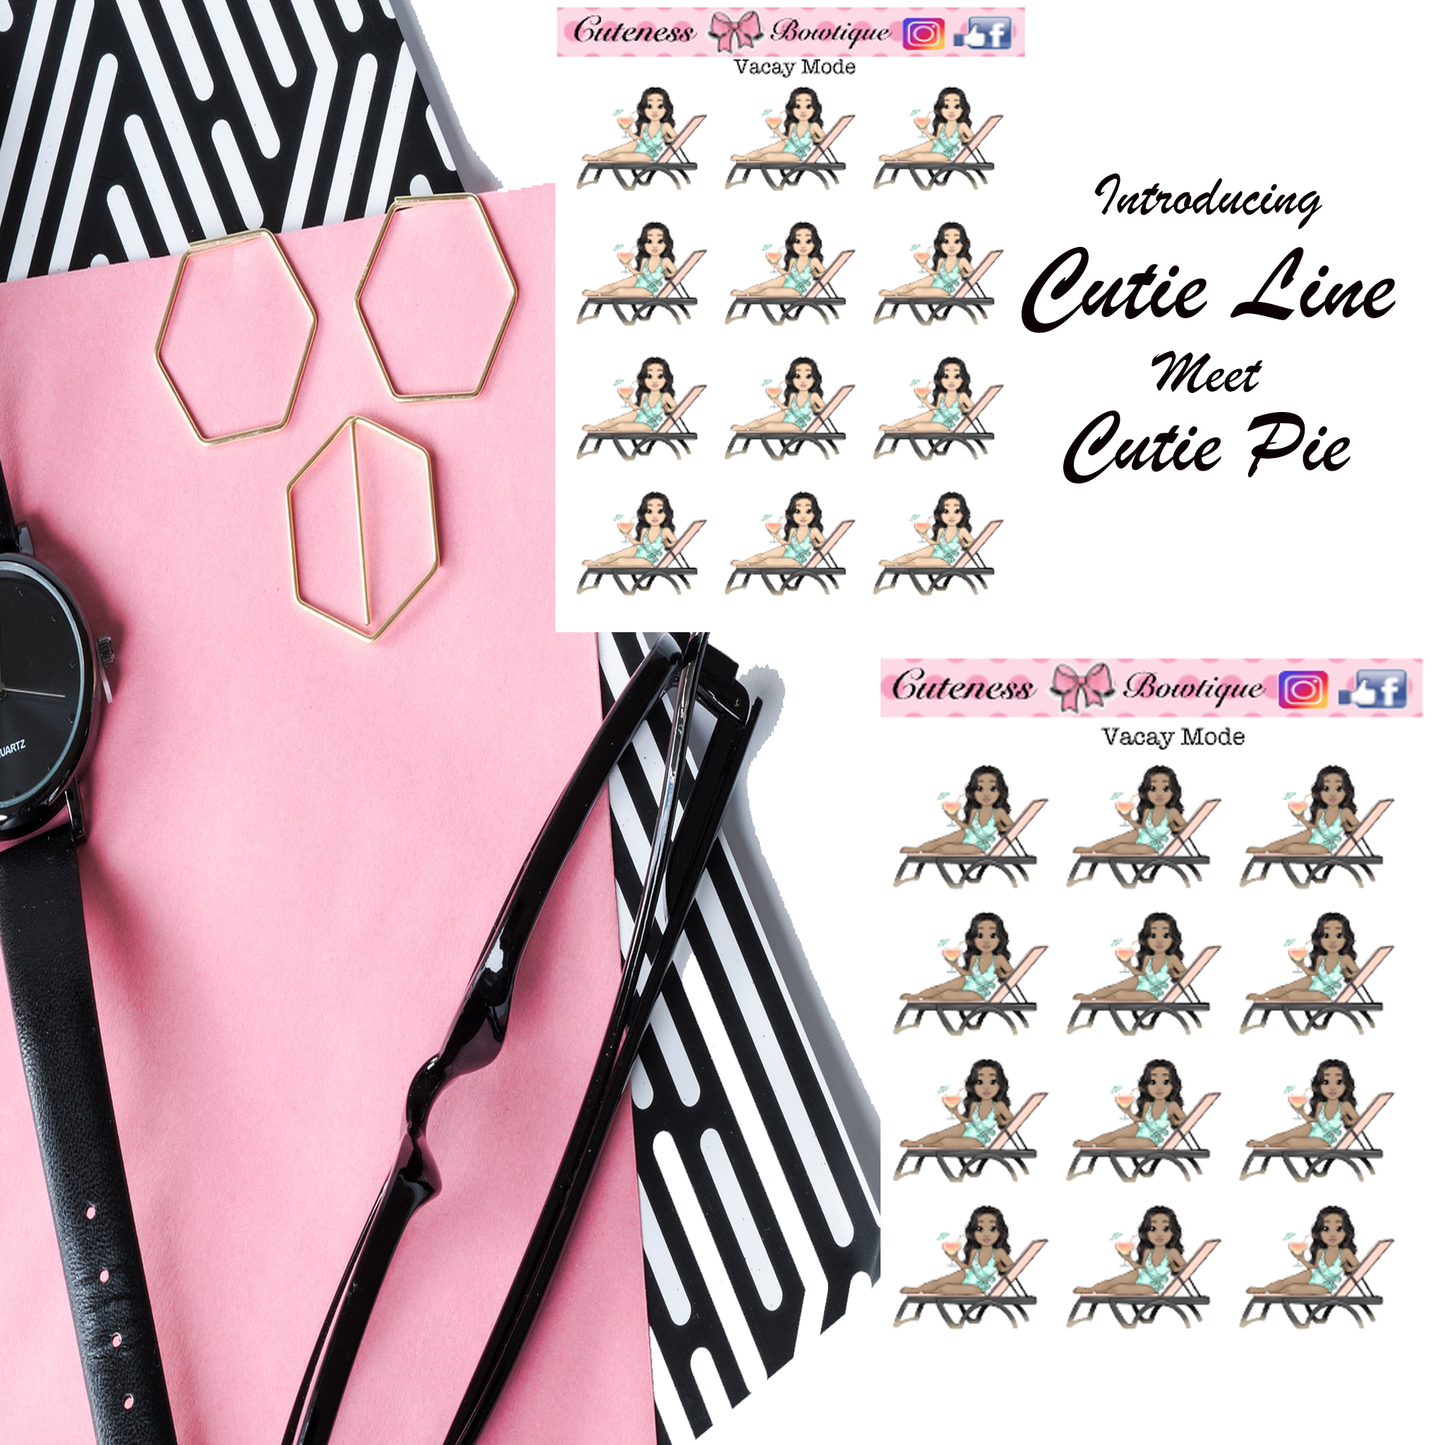 The Cutie Line Icon Sticker Sheet | Cuteness Planner Stickers for Agendas, Planners, Notebooks, Dividers |  VACAY MODE